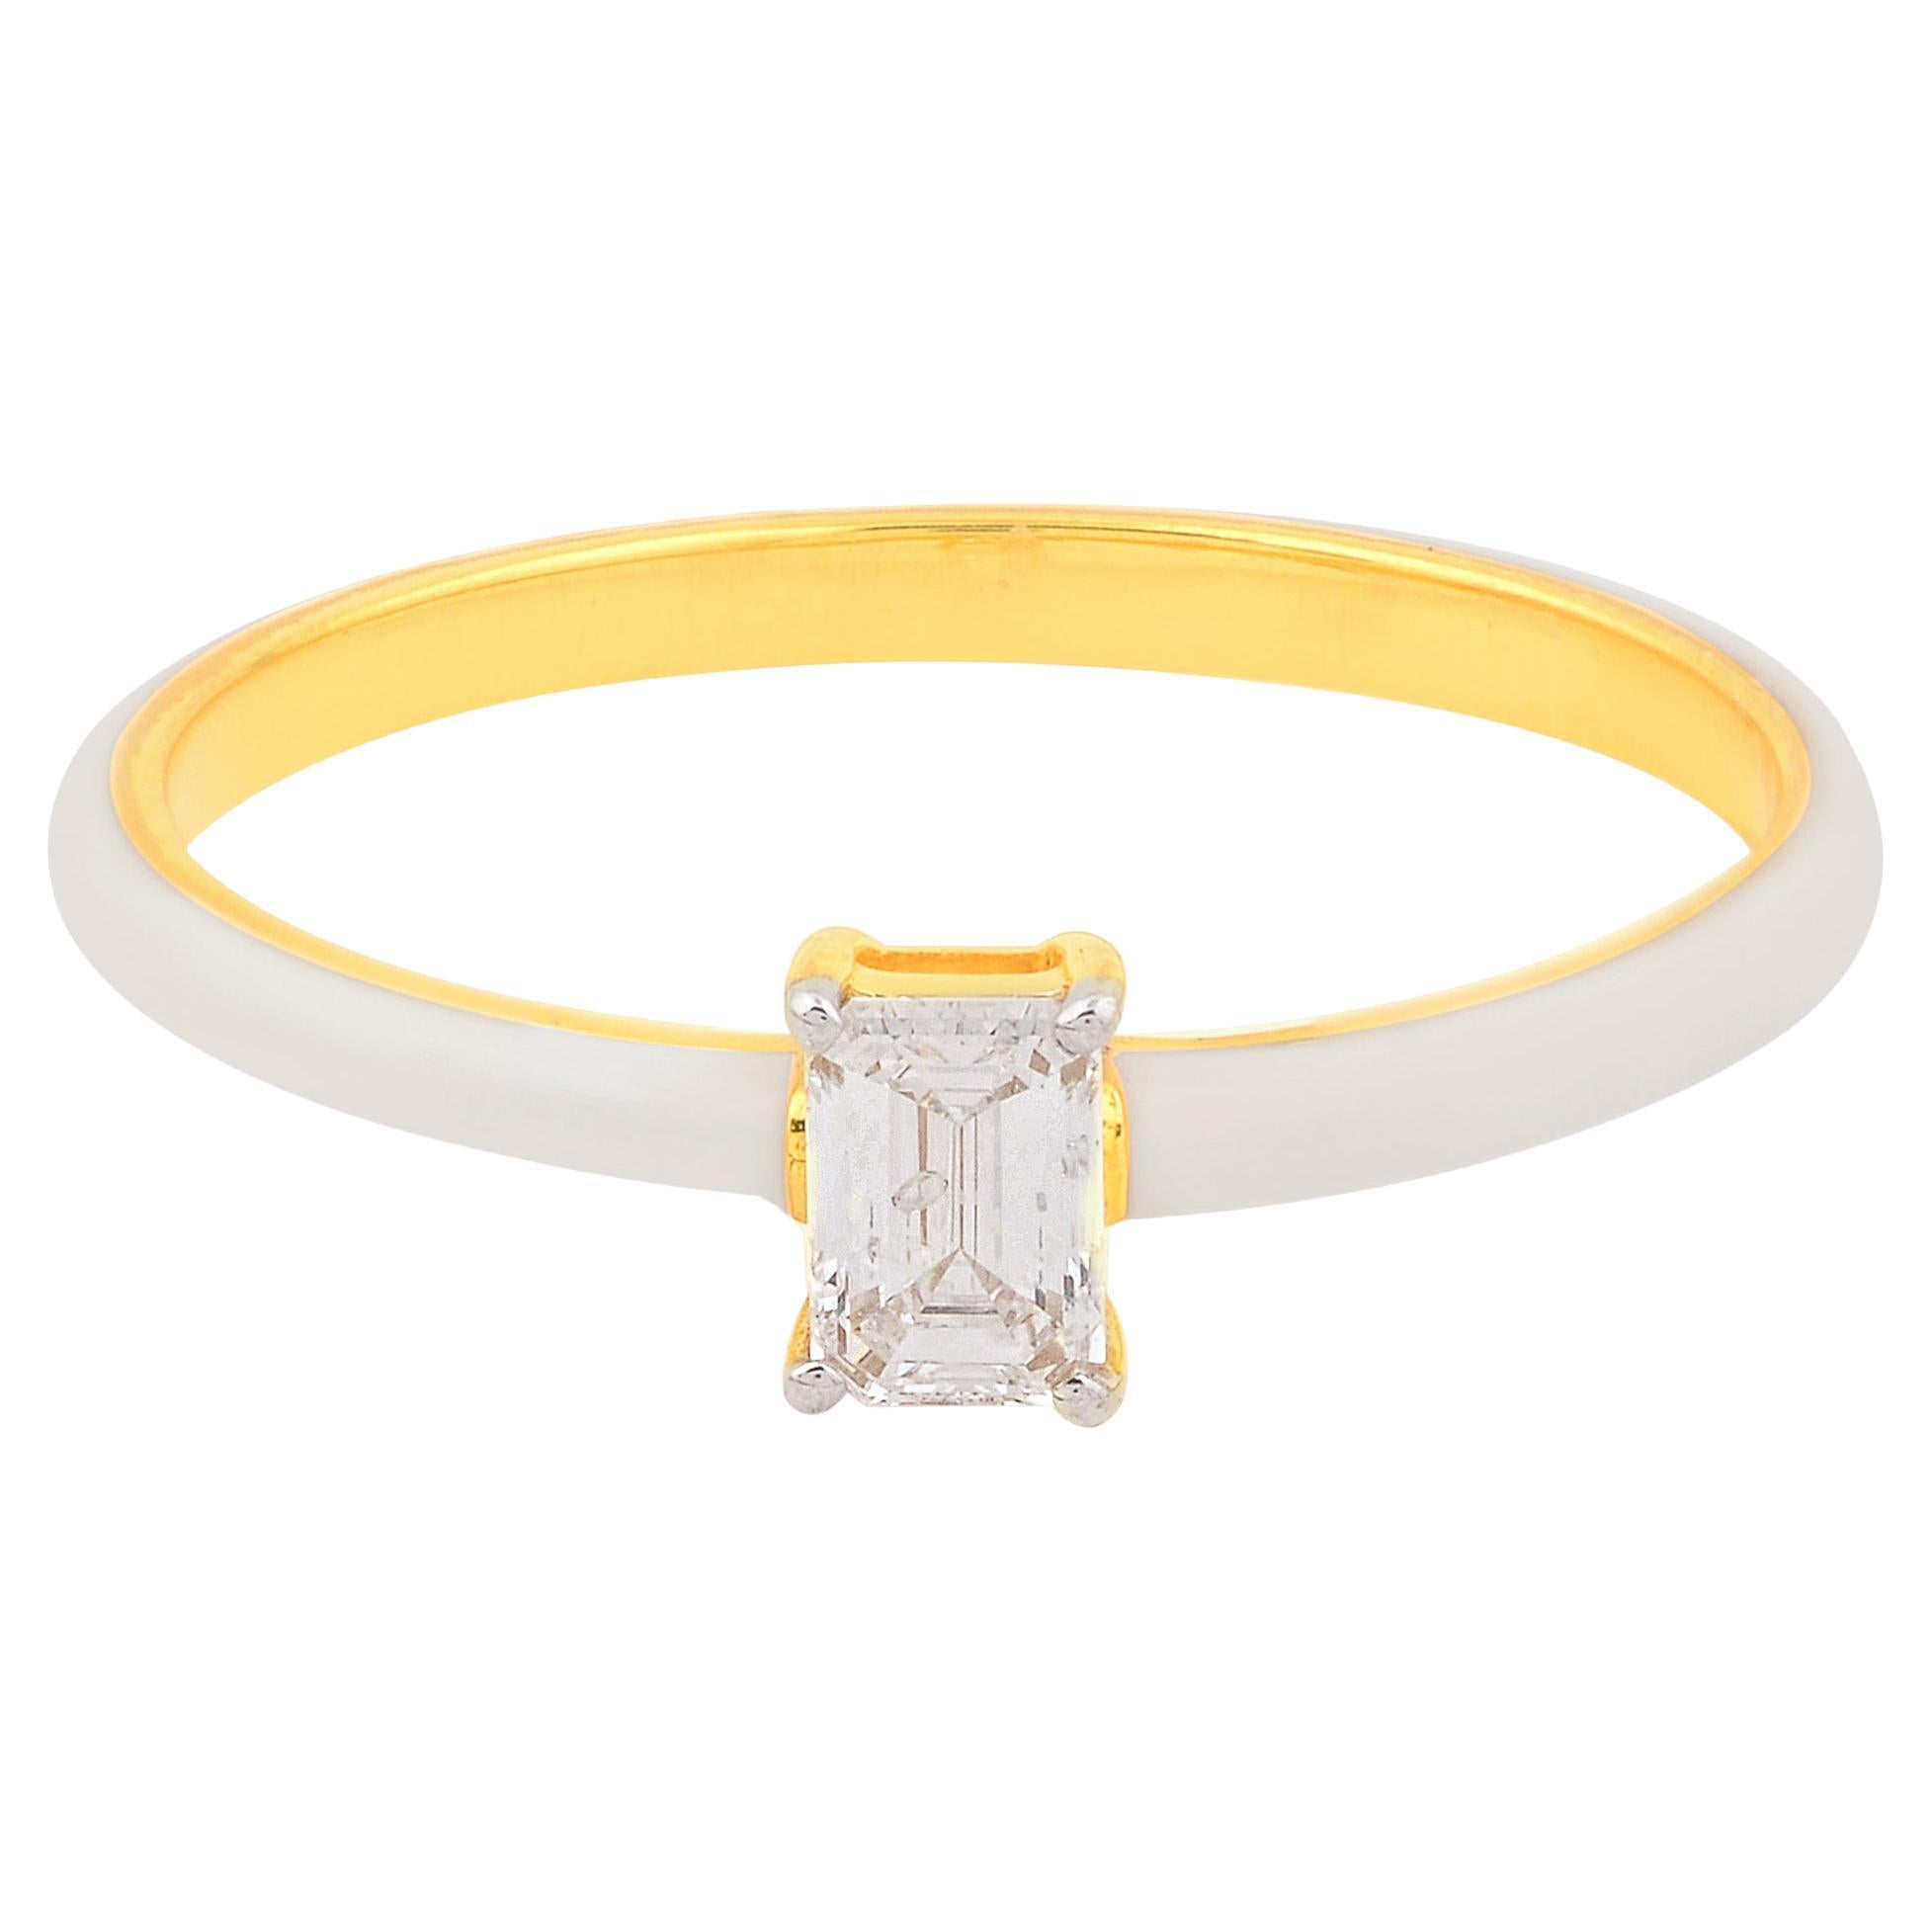 For Sale:  0.26 Carat Solitaire Emerald Cut Diamond Band Ring White Enamel 18k Yellow Gold